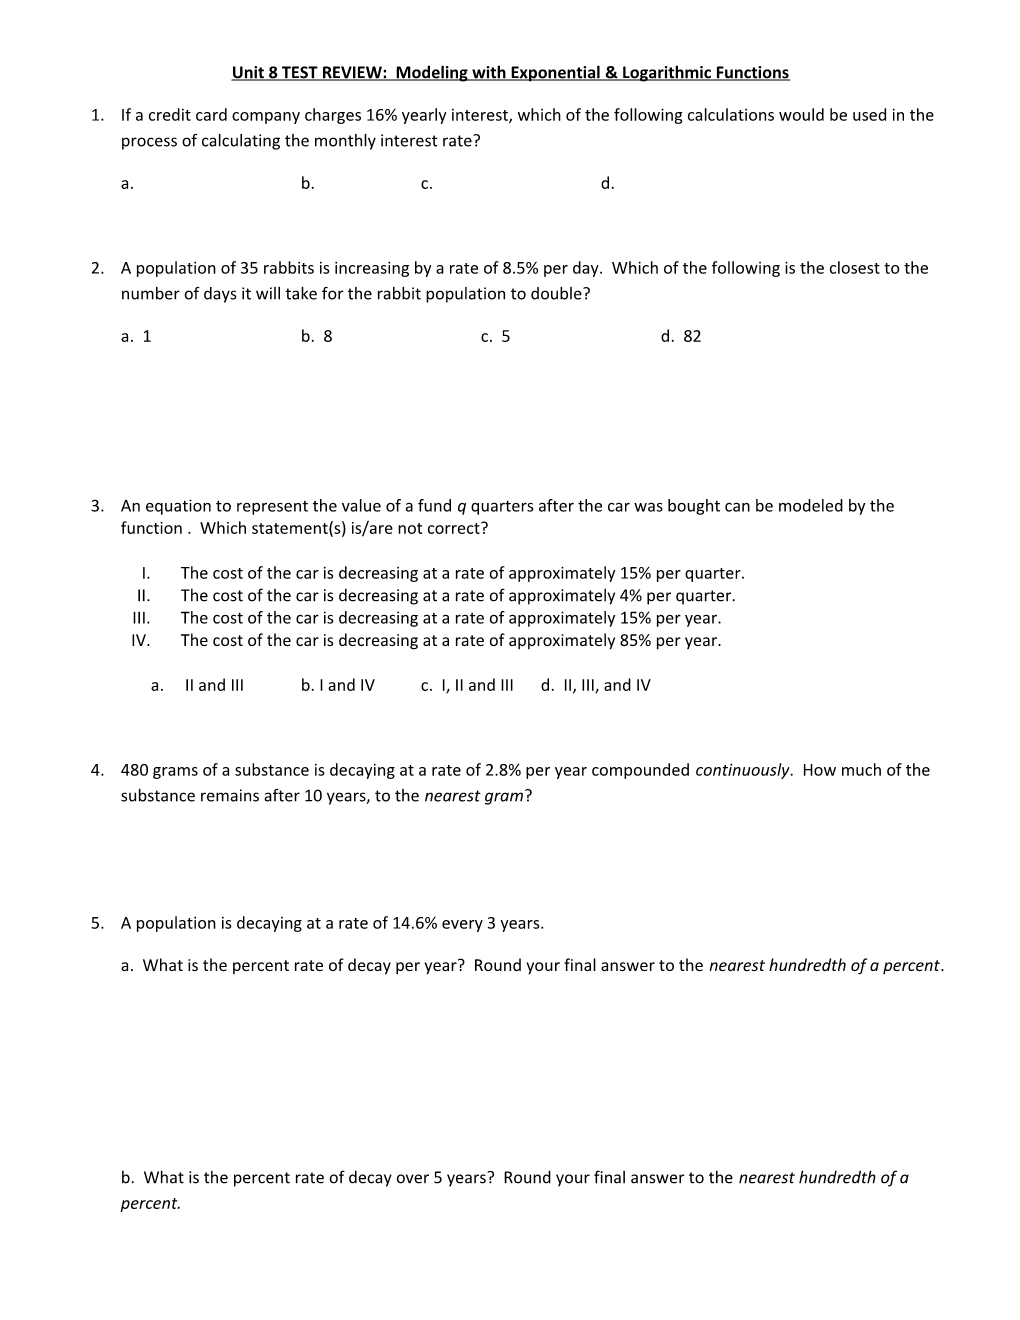 Unit 8 TEST REVIEW: Modeling with Exponential & Logarithmic Functions